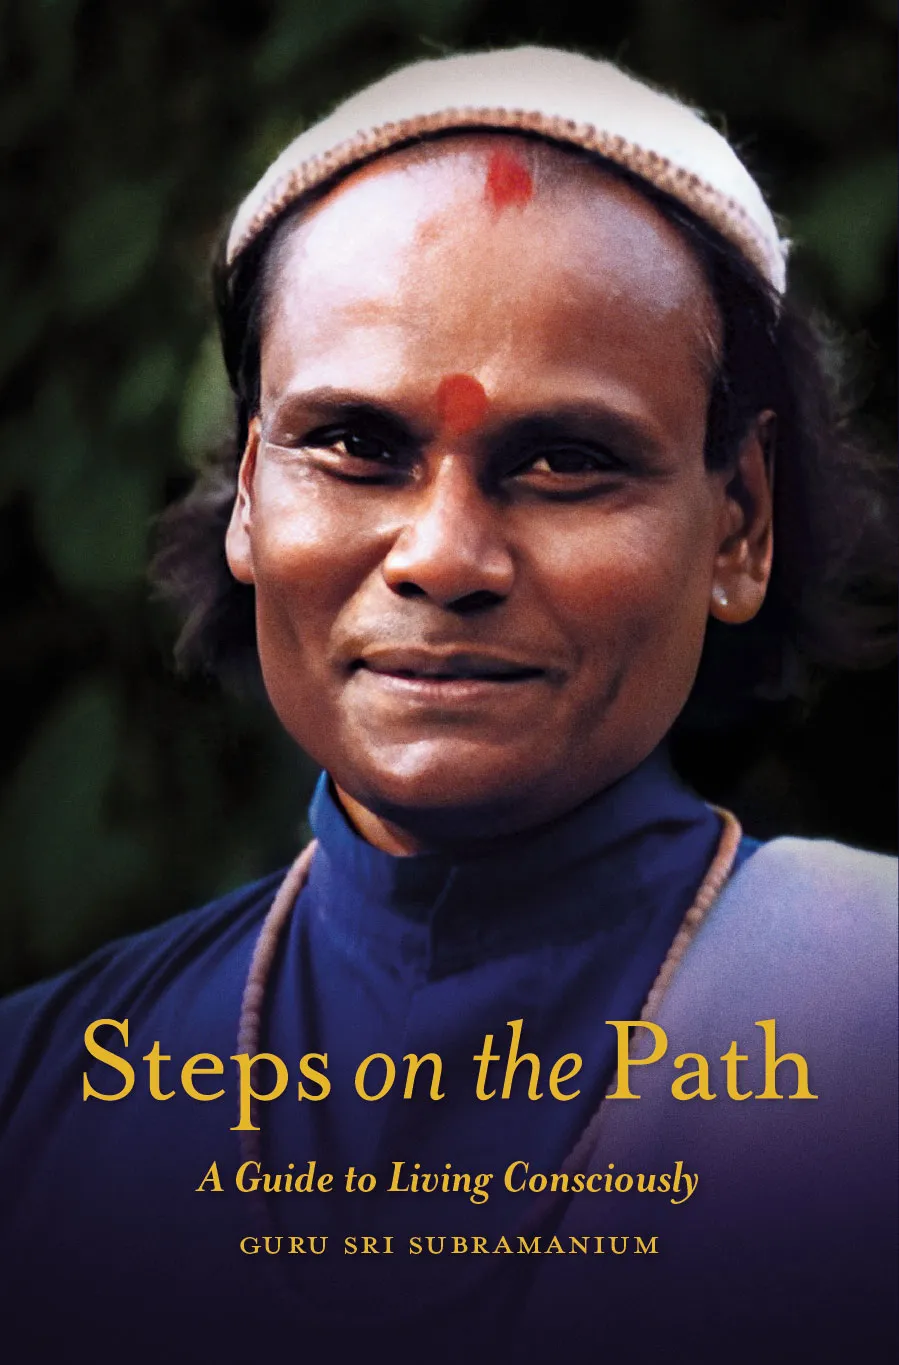 Front cover of Steps on the Path; a book of Guru Sri Subramanium's teachings